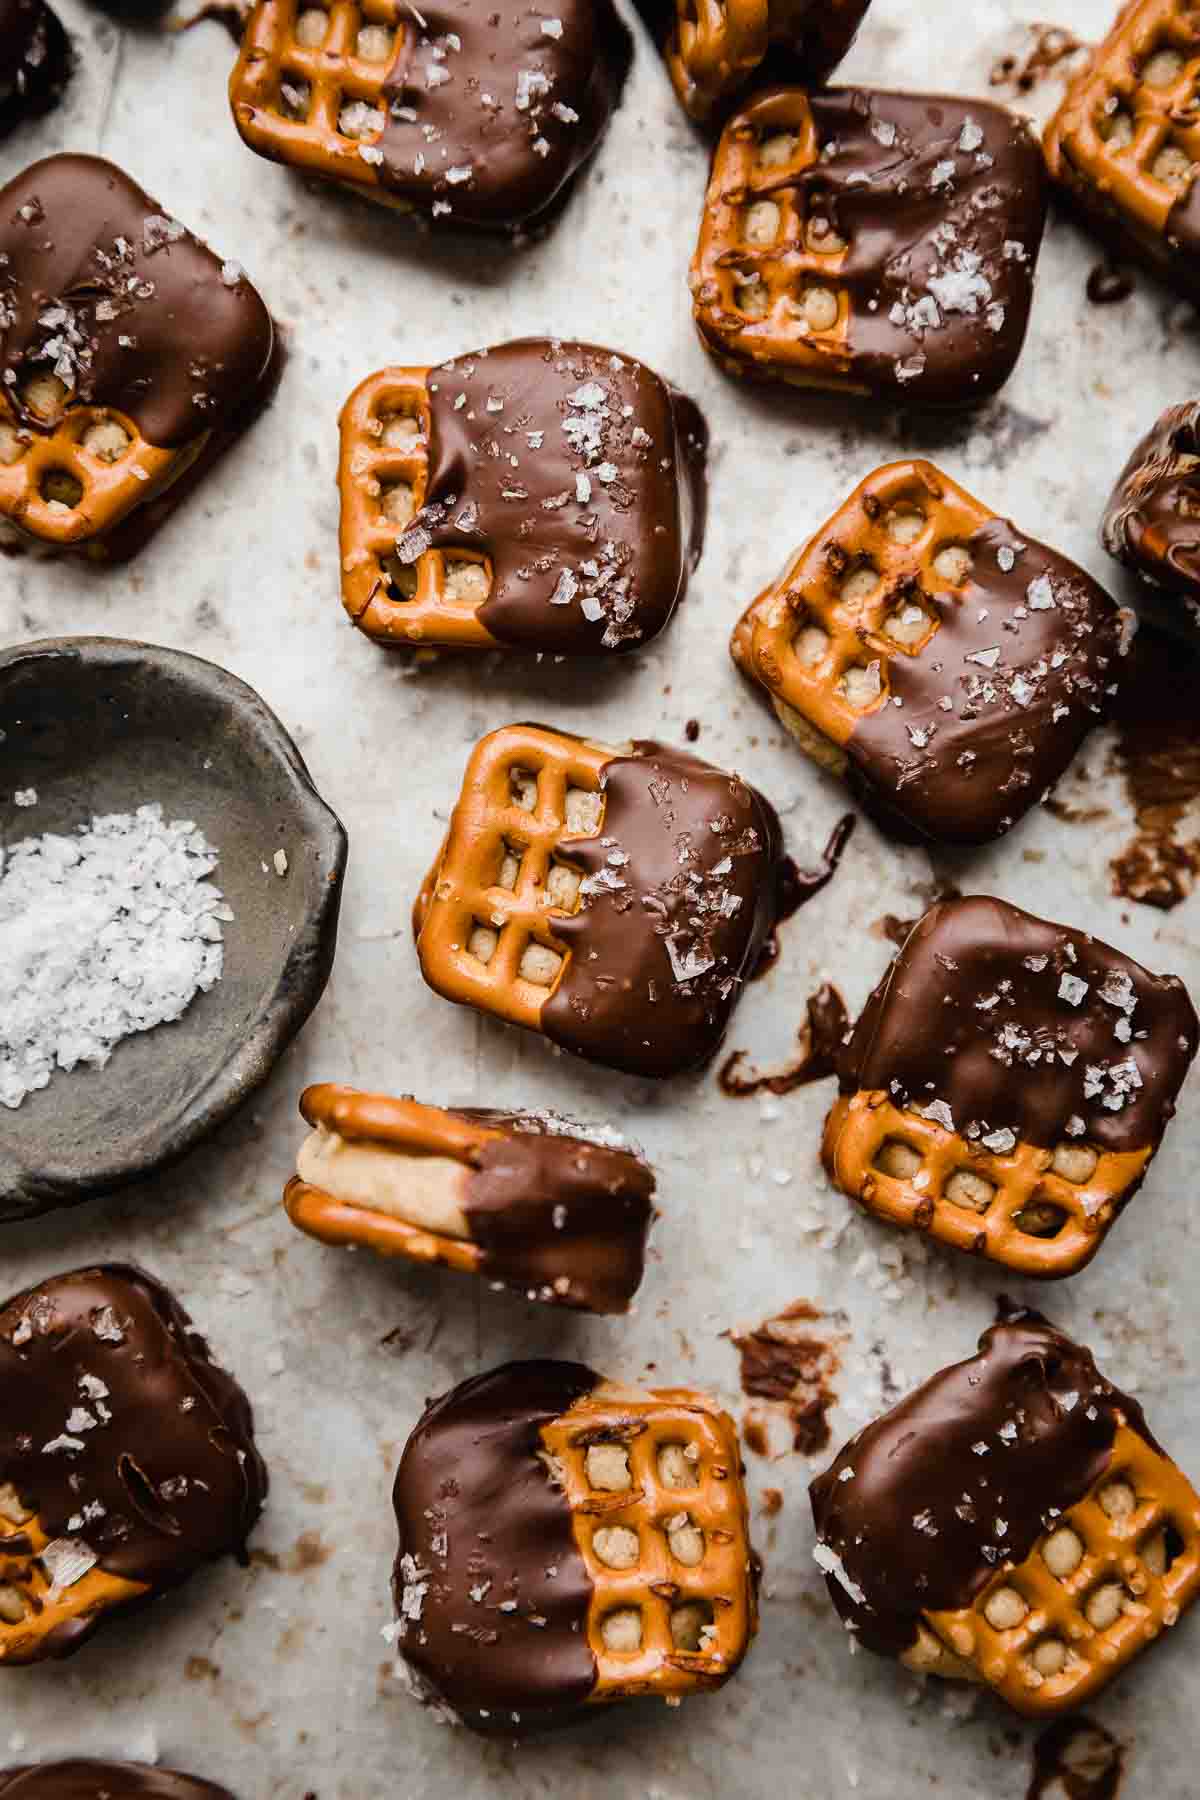 Square pretzels sandwiched with peanut butter mixture and half dipped in chocolate.